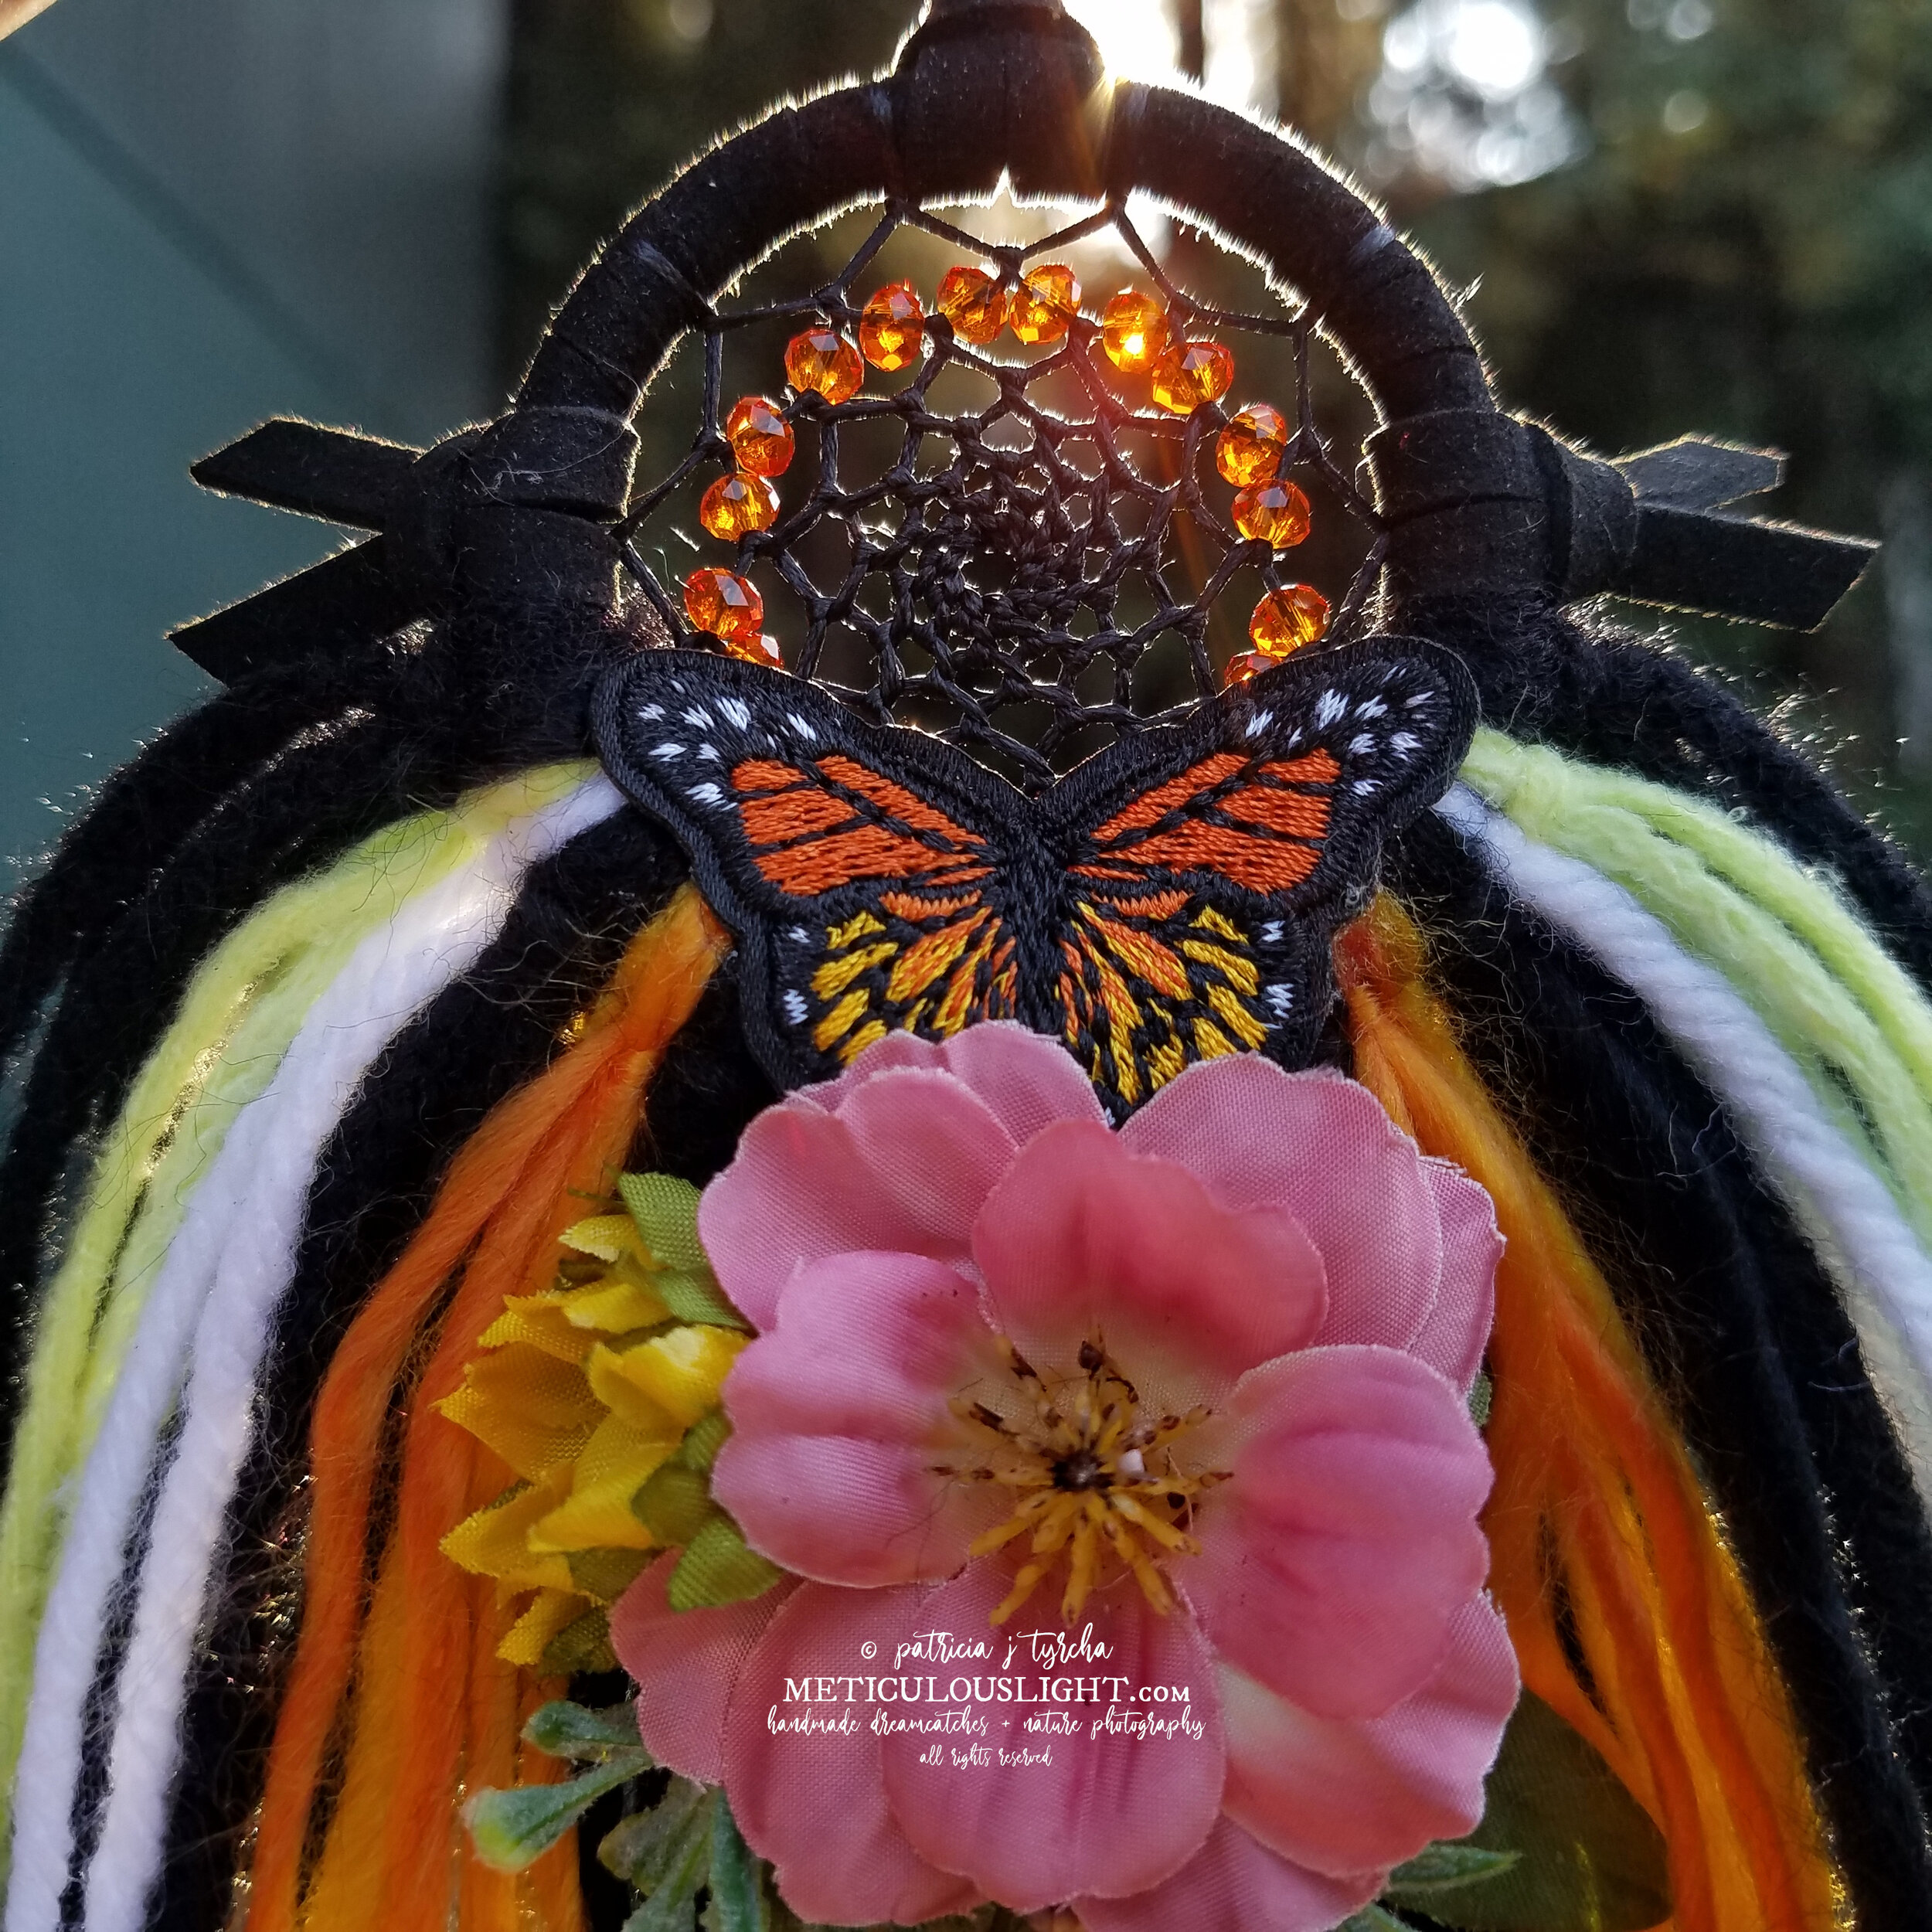 © patricia j tyrcha Monarch Butterfly Dream Catcher with flowers and milkweed seeds ALL RIGHTS RESERVED METICULOUSLIGHT1W.jpg